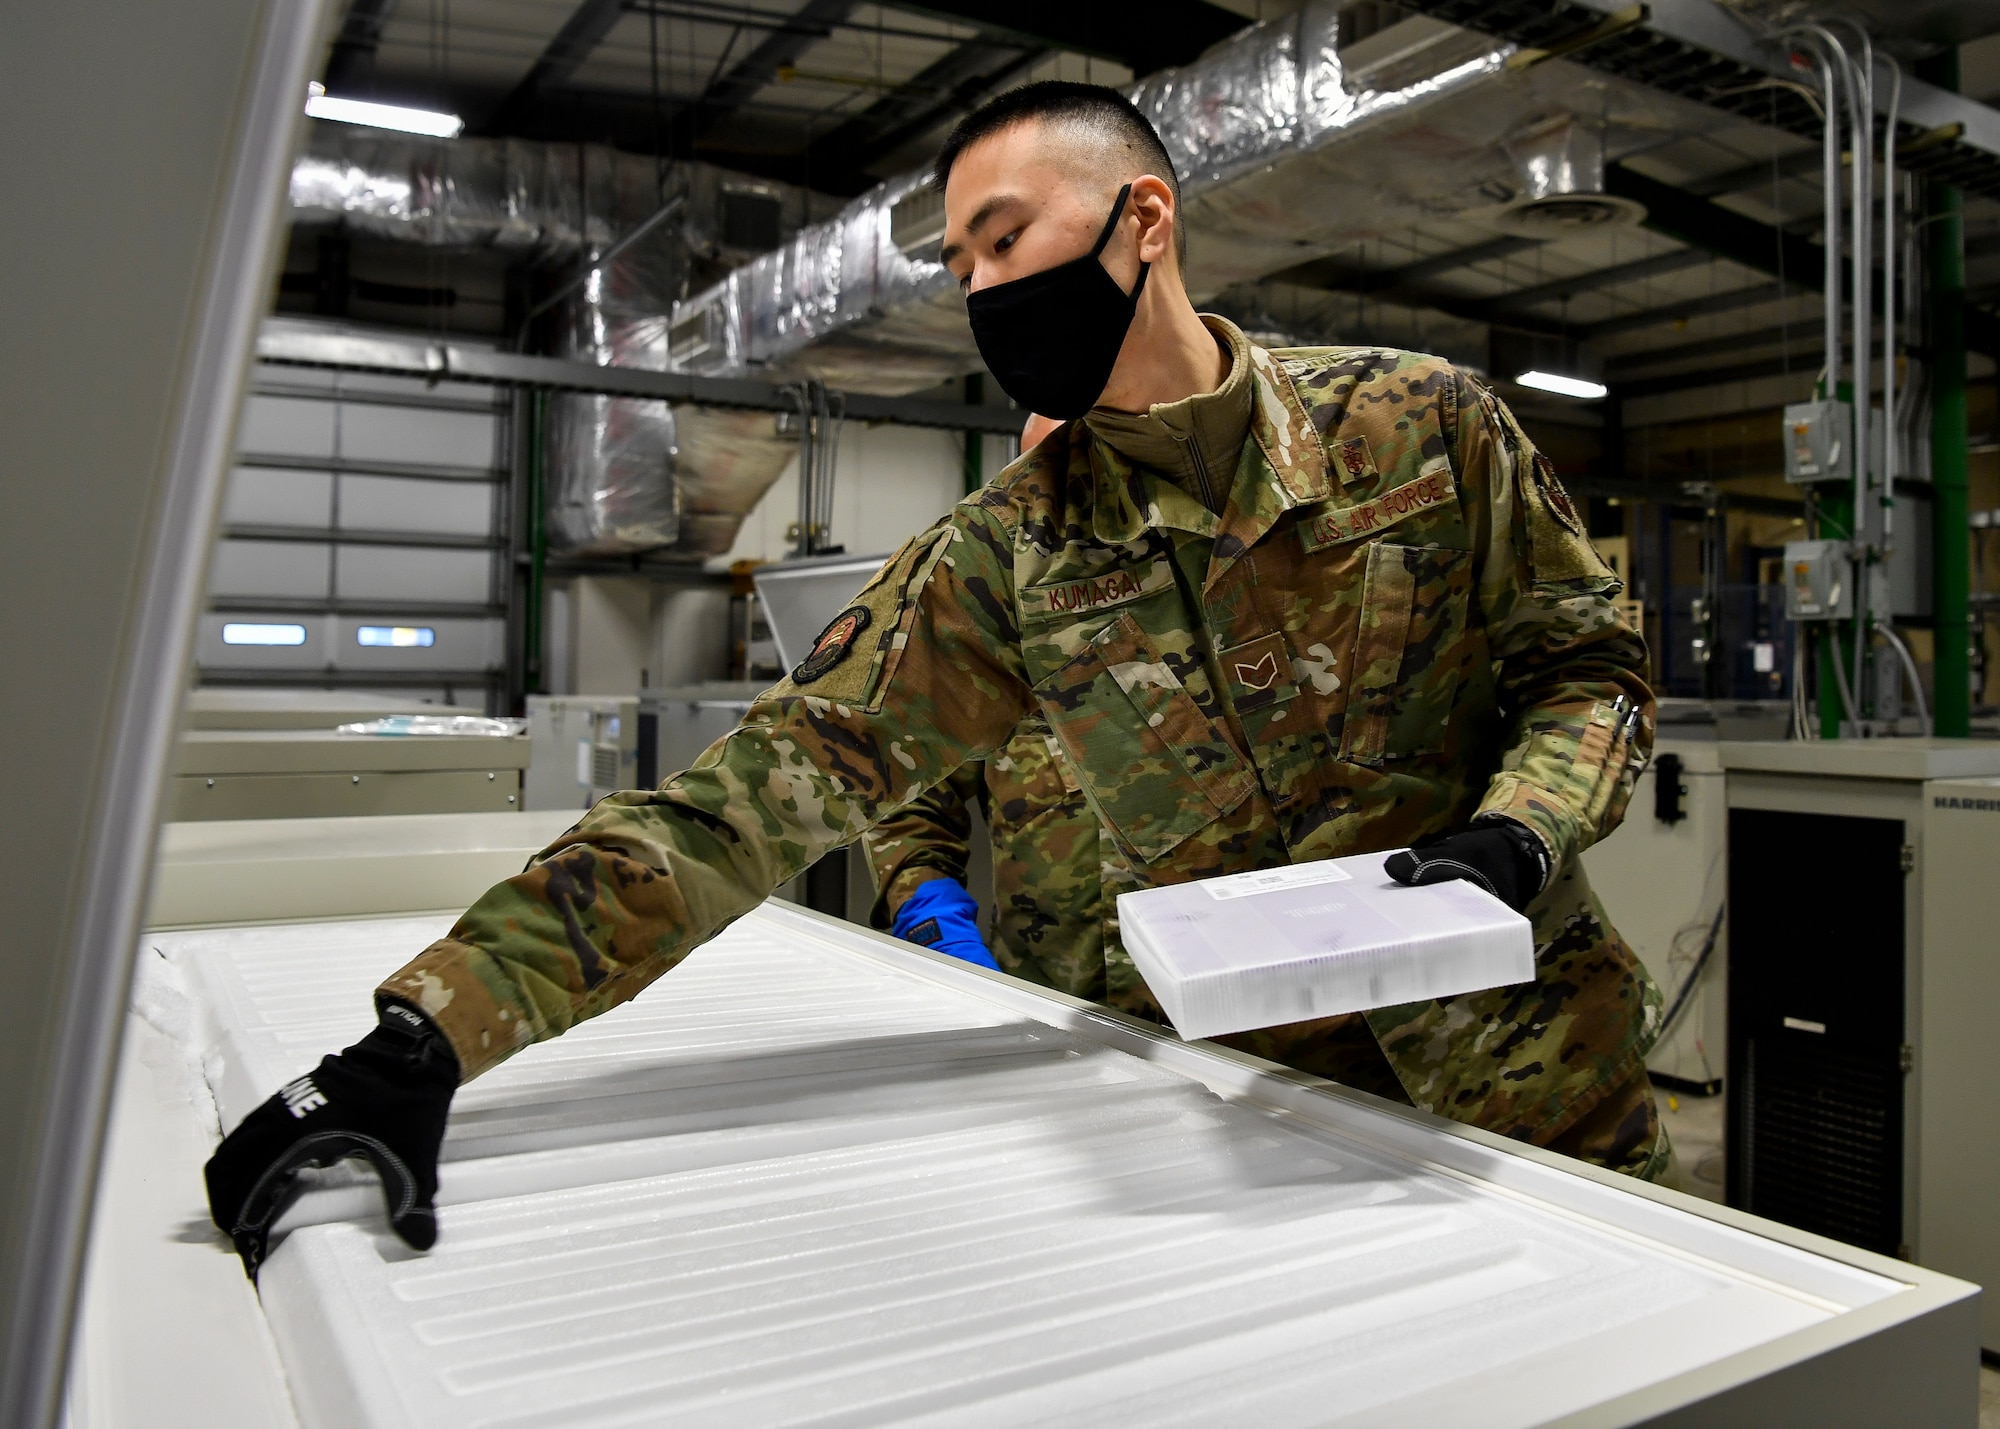 U.S. Air Force Staff Sgt. Akira Kumagai, Armed Services Whole Blood Processing Laboratory – East member, places a batch of COVID-19 vaccines inside a freezer on Joint Base McGuire-Dix-Lakehurst, New Jersey, Dec. 31, 2020. The vaccines, which must be temperature controlled, were placed into freezers before being sent to the McGuire Fitness Center for distribution. (U.S. Air Force photo by Staff Sgt. Jake Carter)